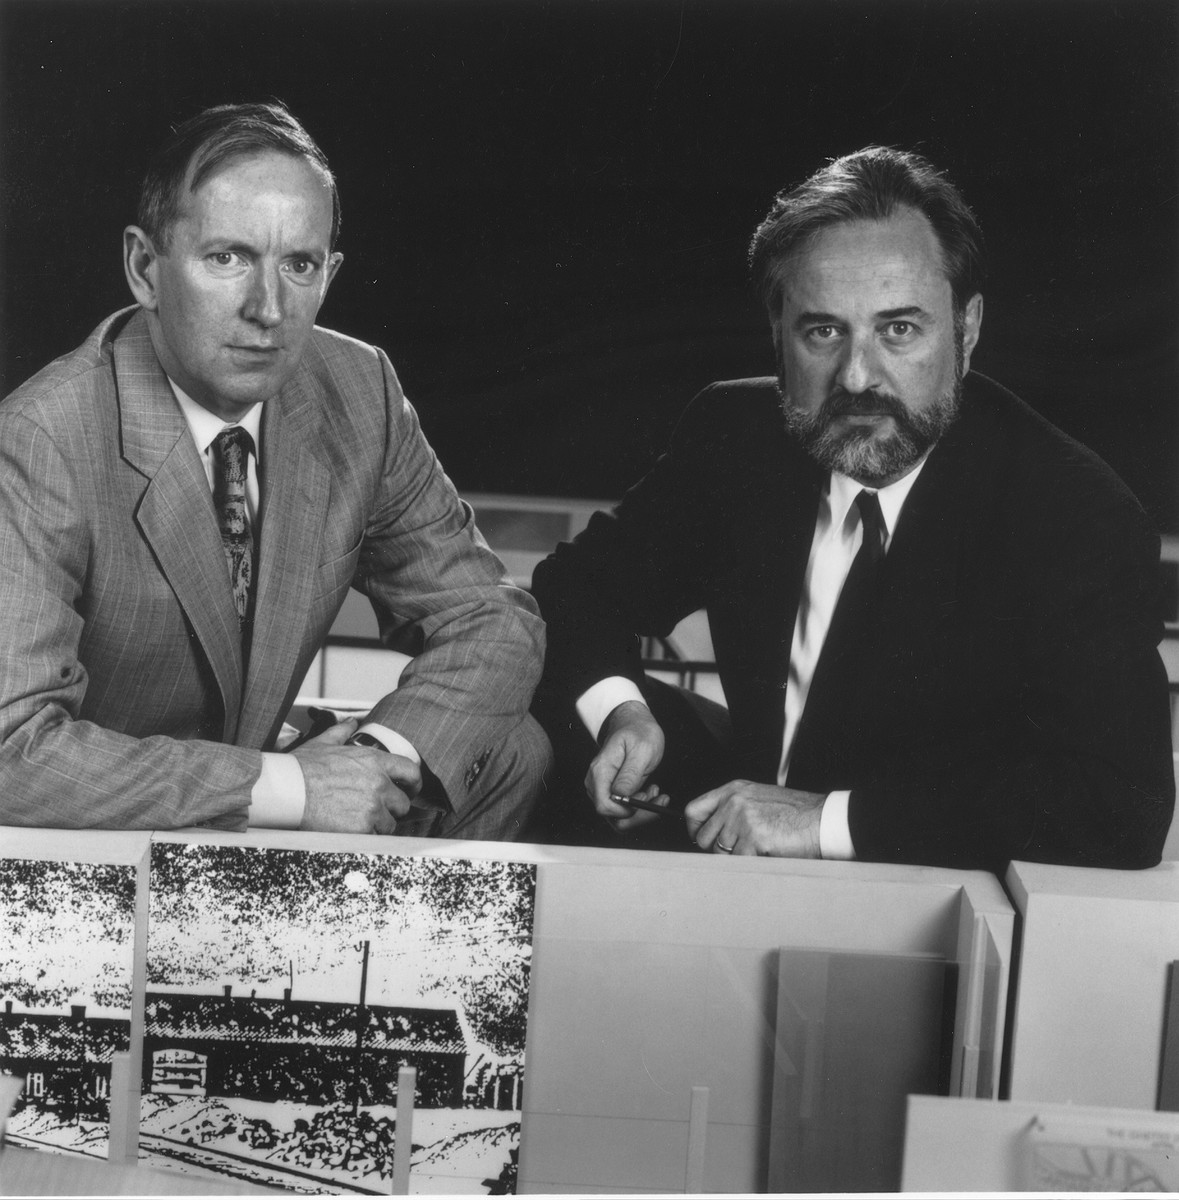 Permanent exhibition director Martin Smith and designer Ralph Appelbaum pose next to the models for the permanent exhibition at the U.S. Holocaust Memorial Museum.